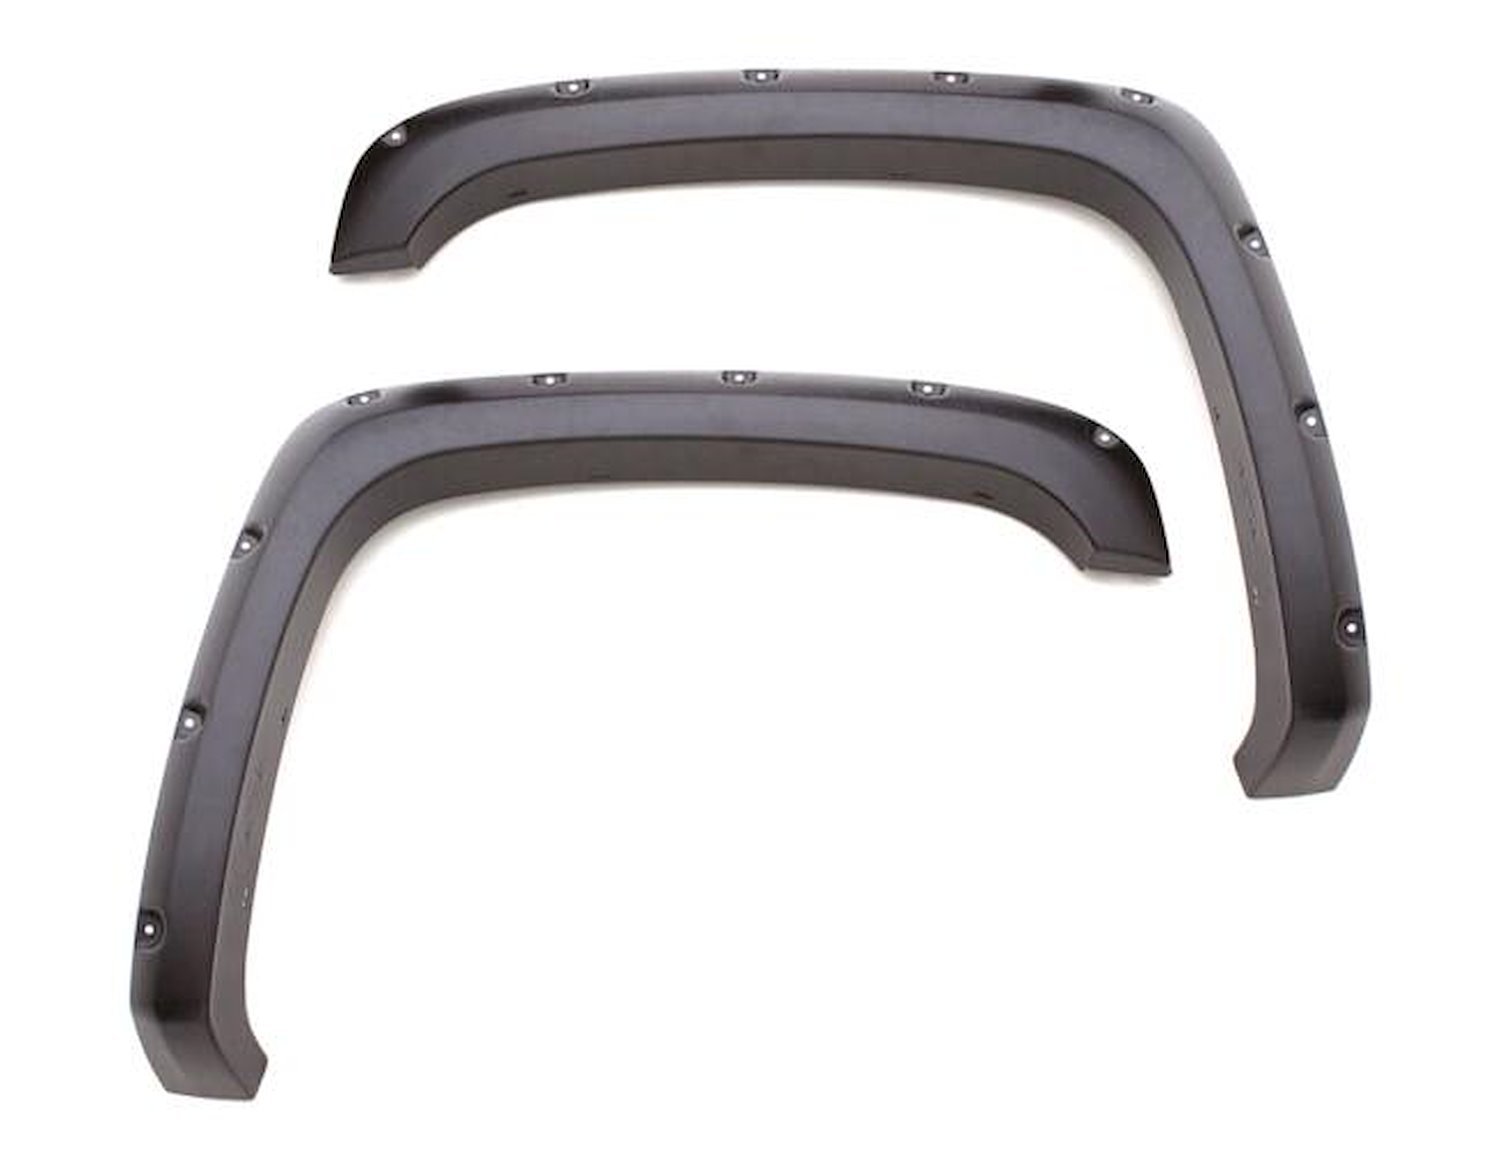 RX Rivet-Style Front Fender Flares For Select Late-Model GMC Sierra 1500 Trucks [Smooth Finish]